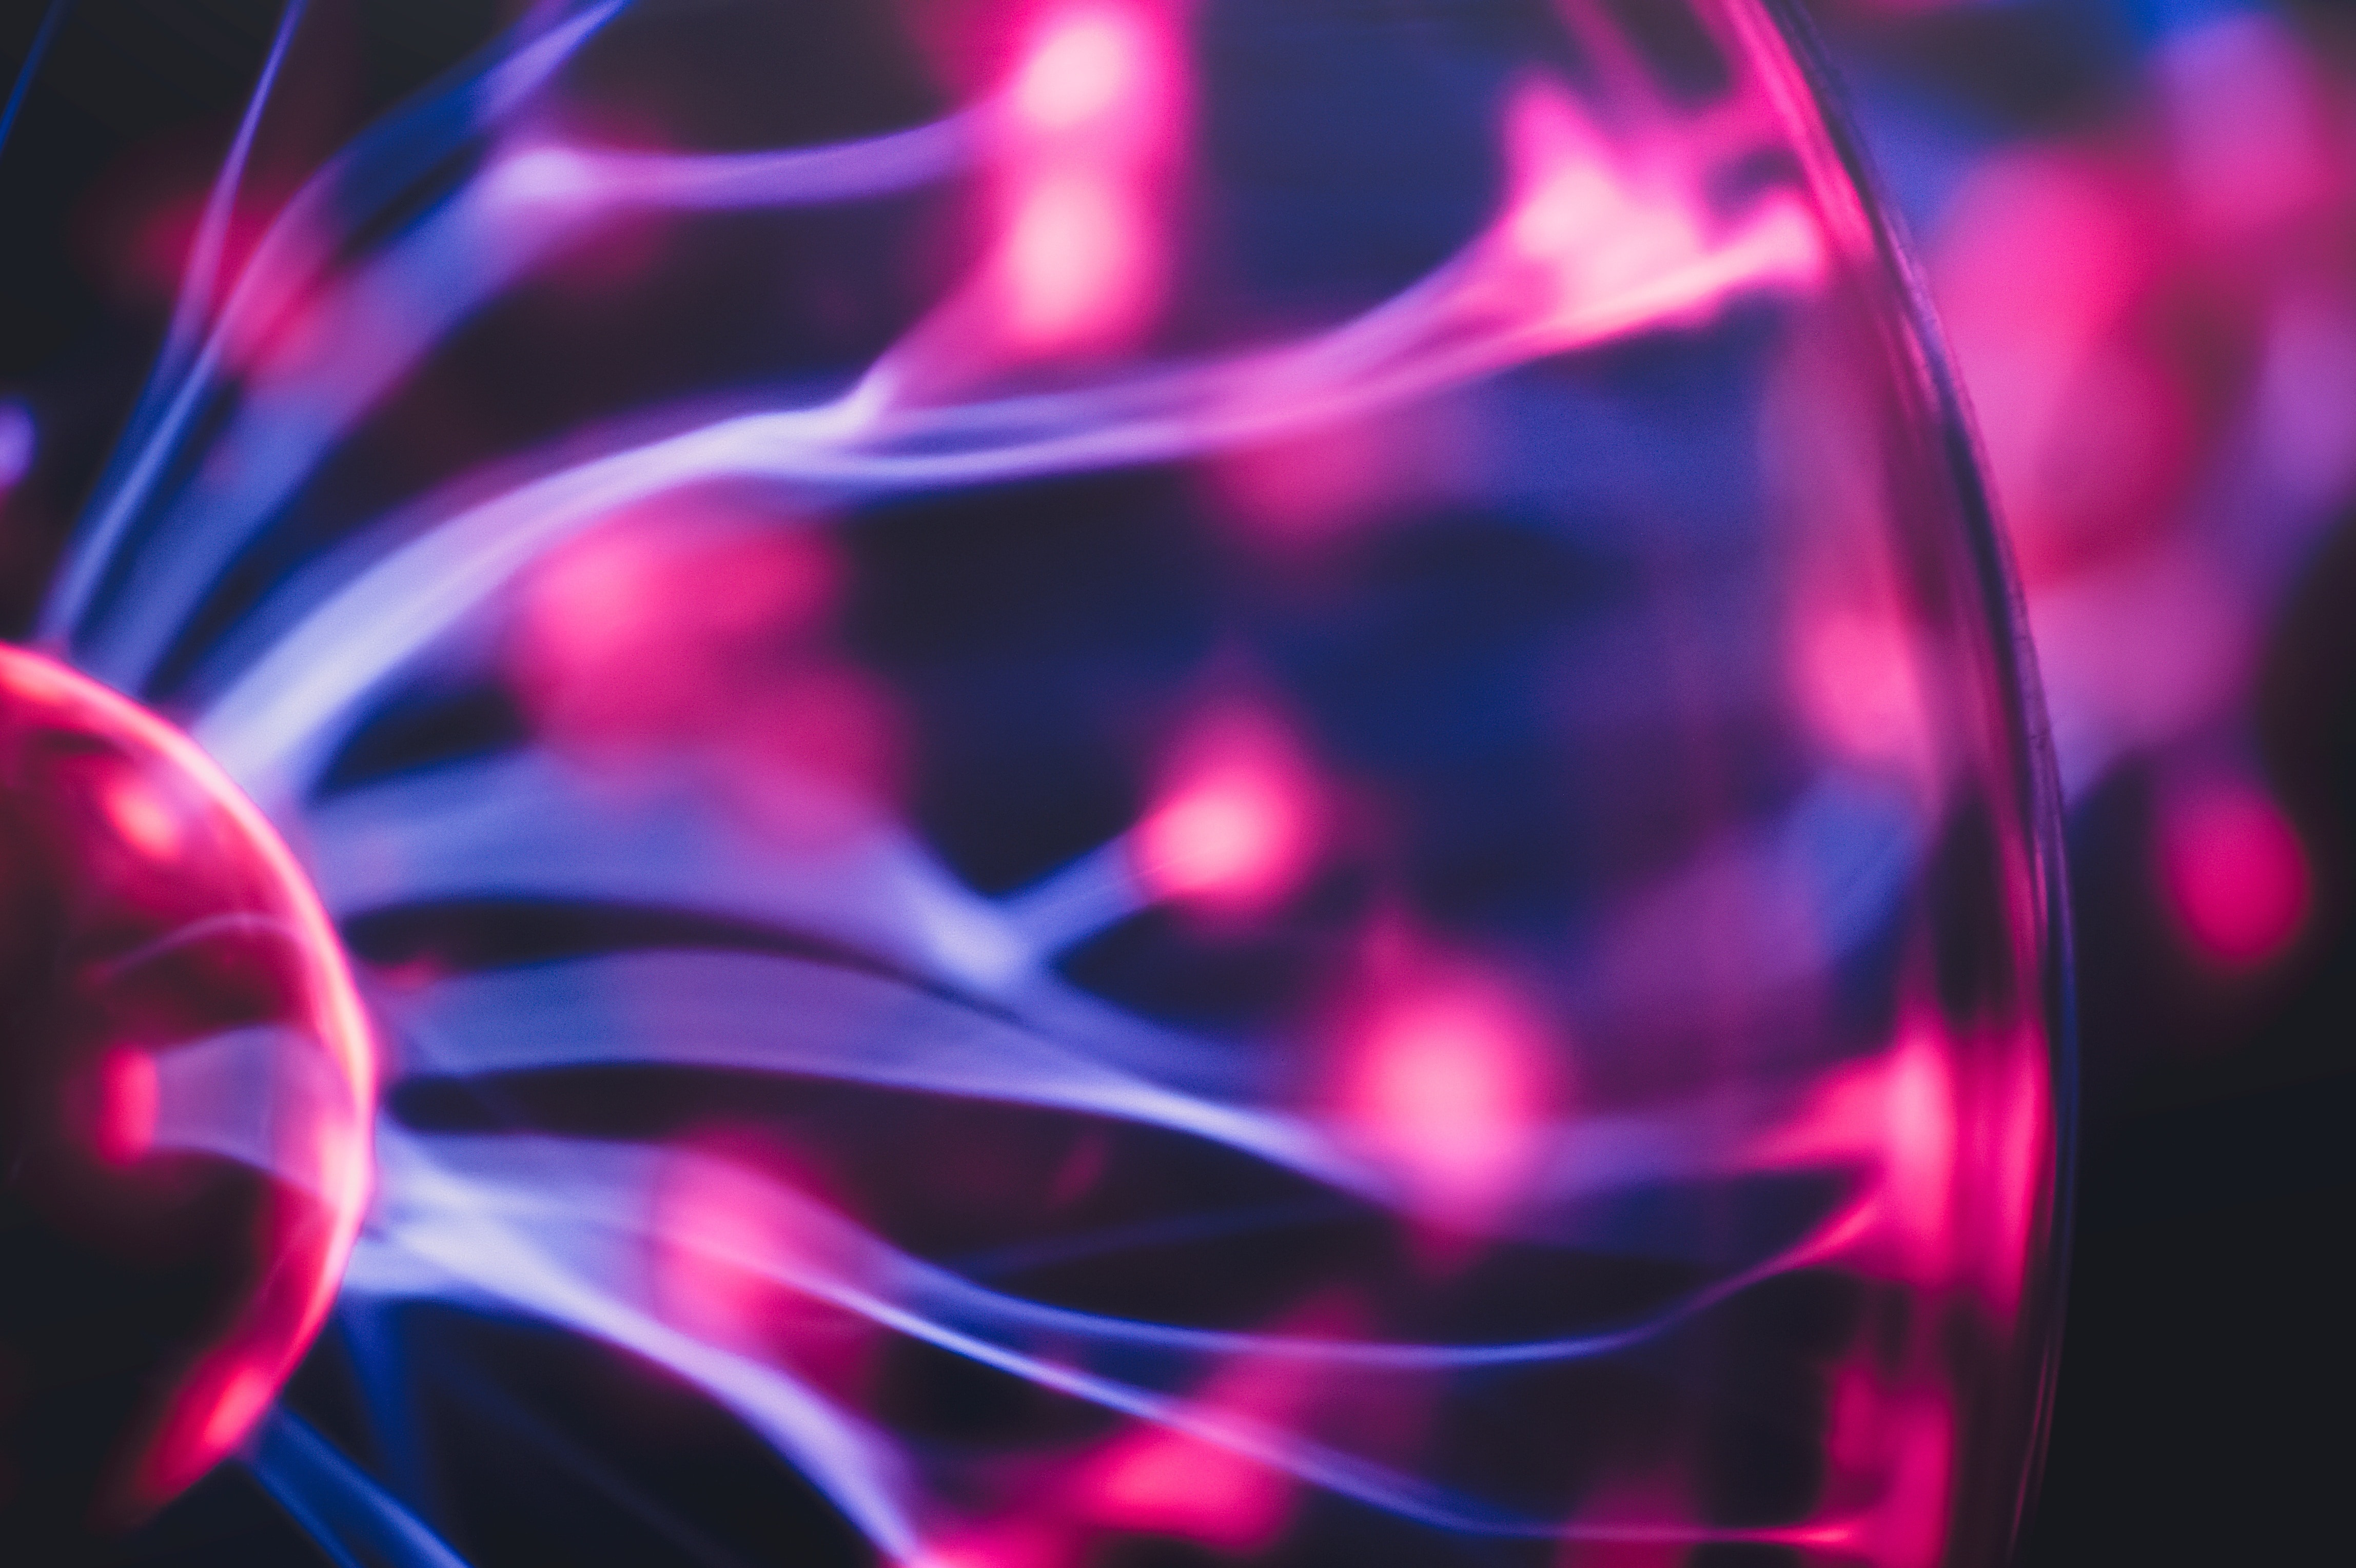 Red, Blue, Power, Electricity, Plasma, abstract, smoke - physical structure